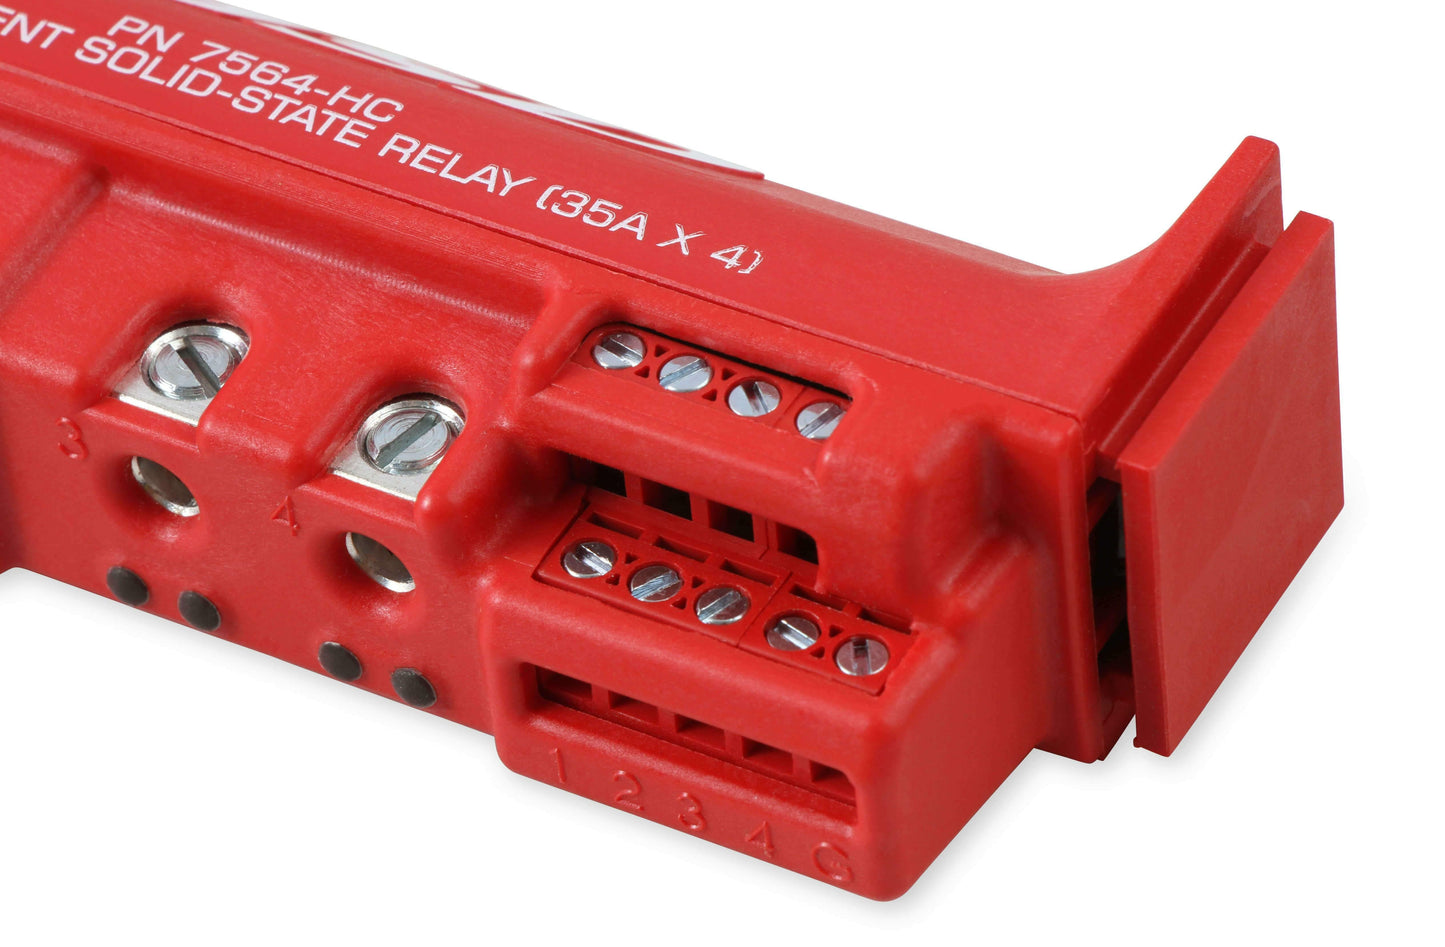 High-Current Solid-State Relay 35Ax4, Red - 7564-HC